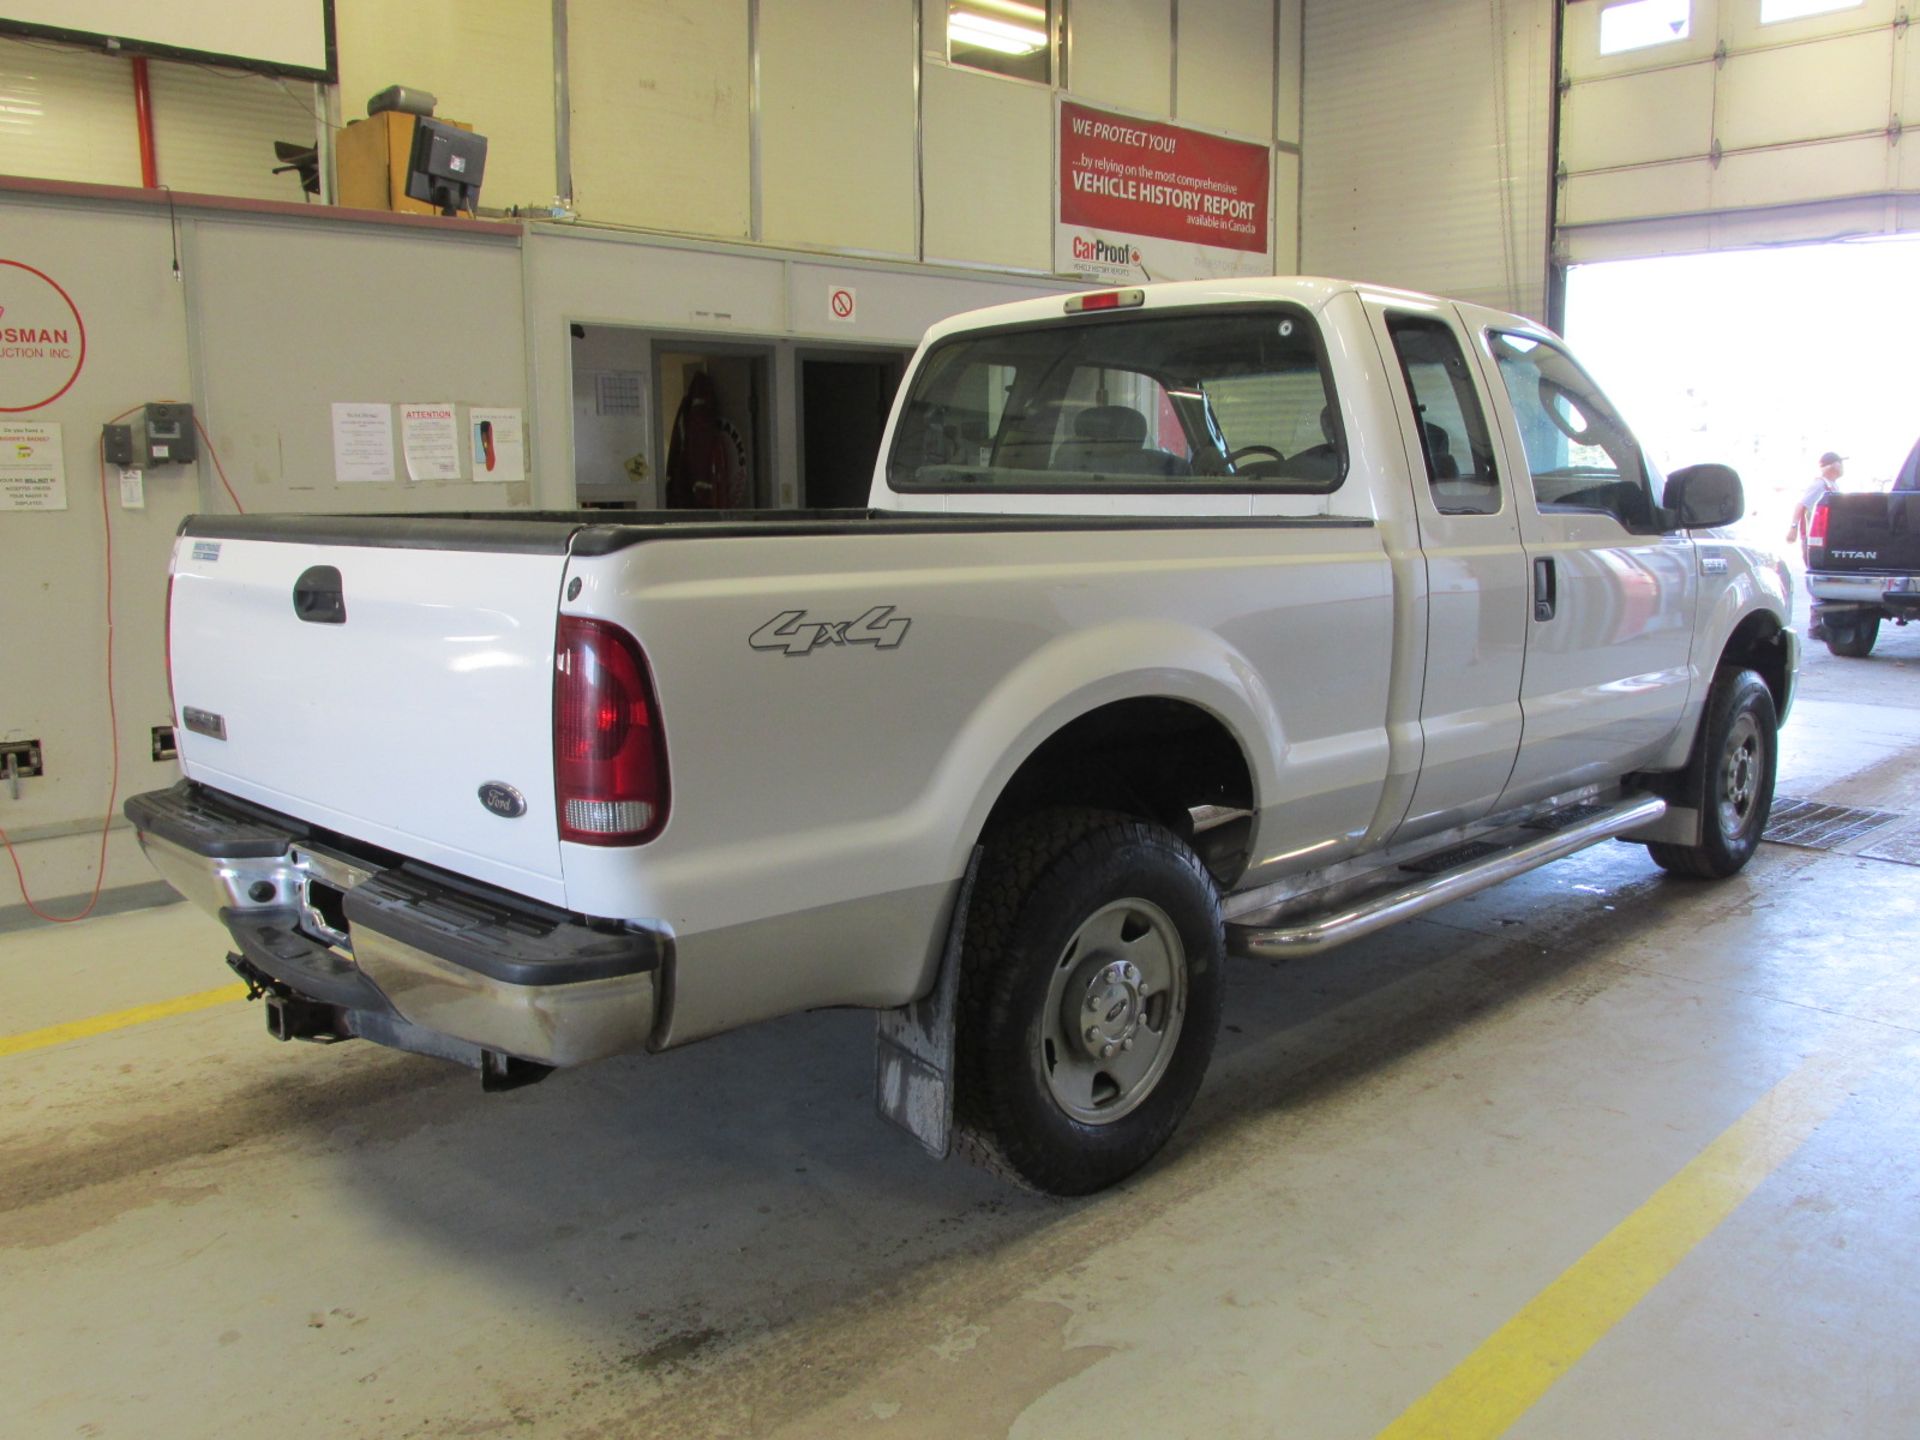 2006 FORD F-250 SD XLT SUPERCAB 4WD 5.4L V8 SOHC 16V AUTOMATIC SN:1FTSX21516EB69806 OPTIONS:AC TW CC - Image 4 of 10